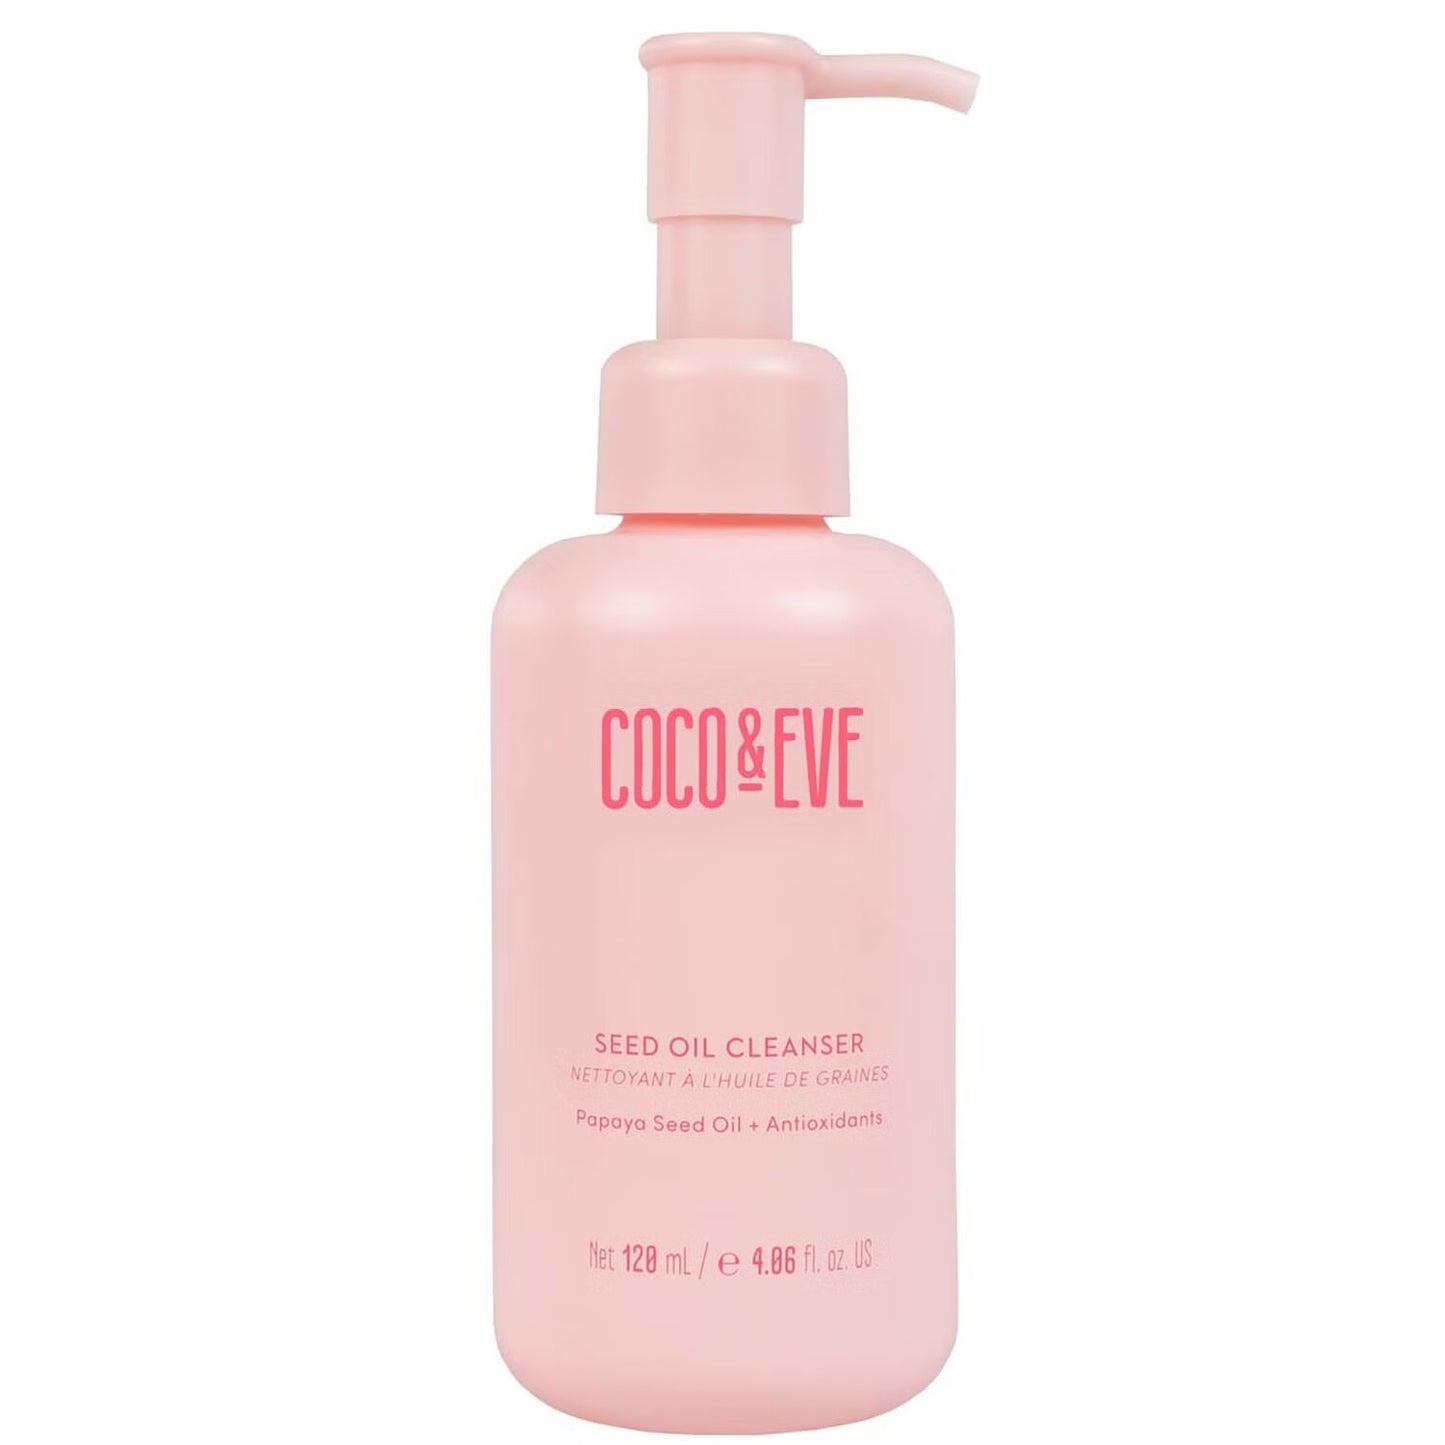 Coco & Eve Seed Oil Cleanser - 120ml